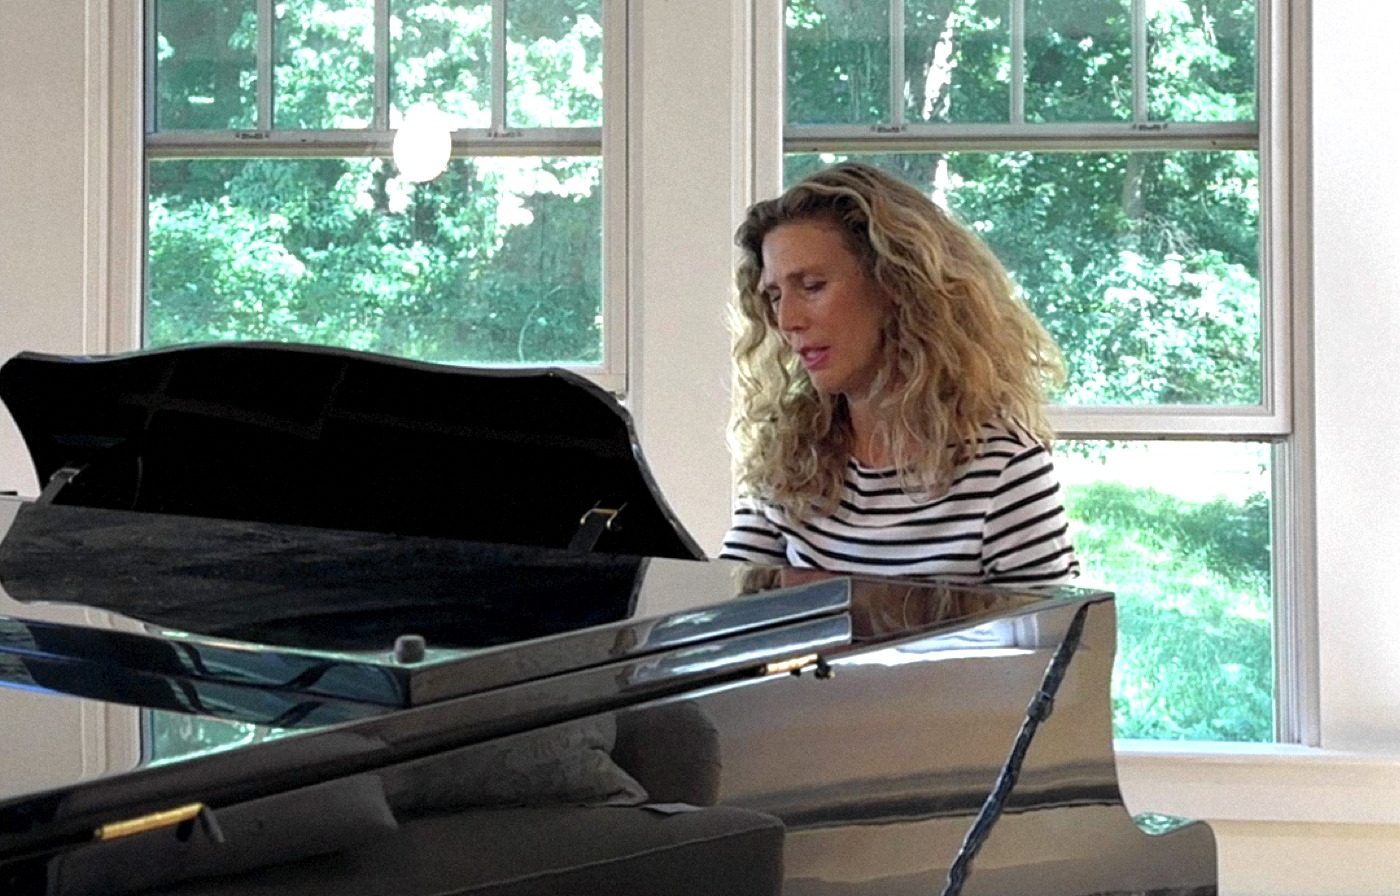 Sophie B. Hawkins' new anthems- exactly what LGBTQ youth need